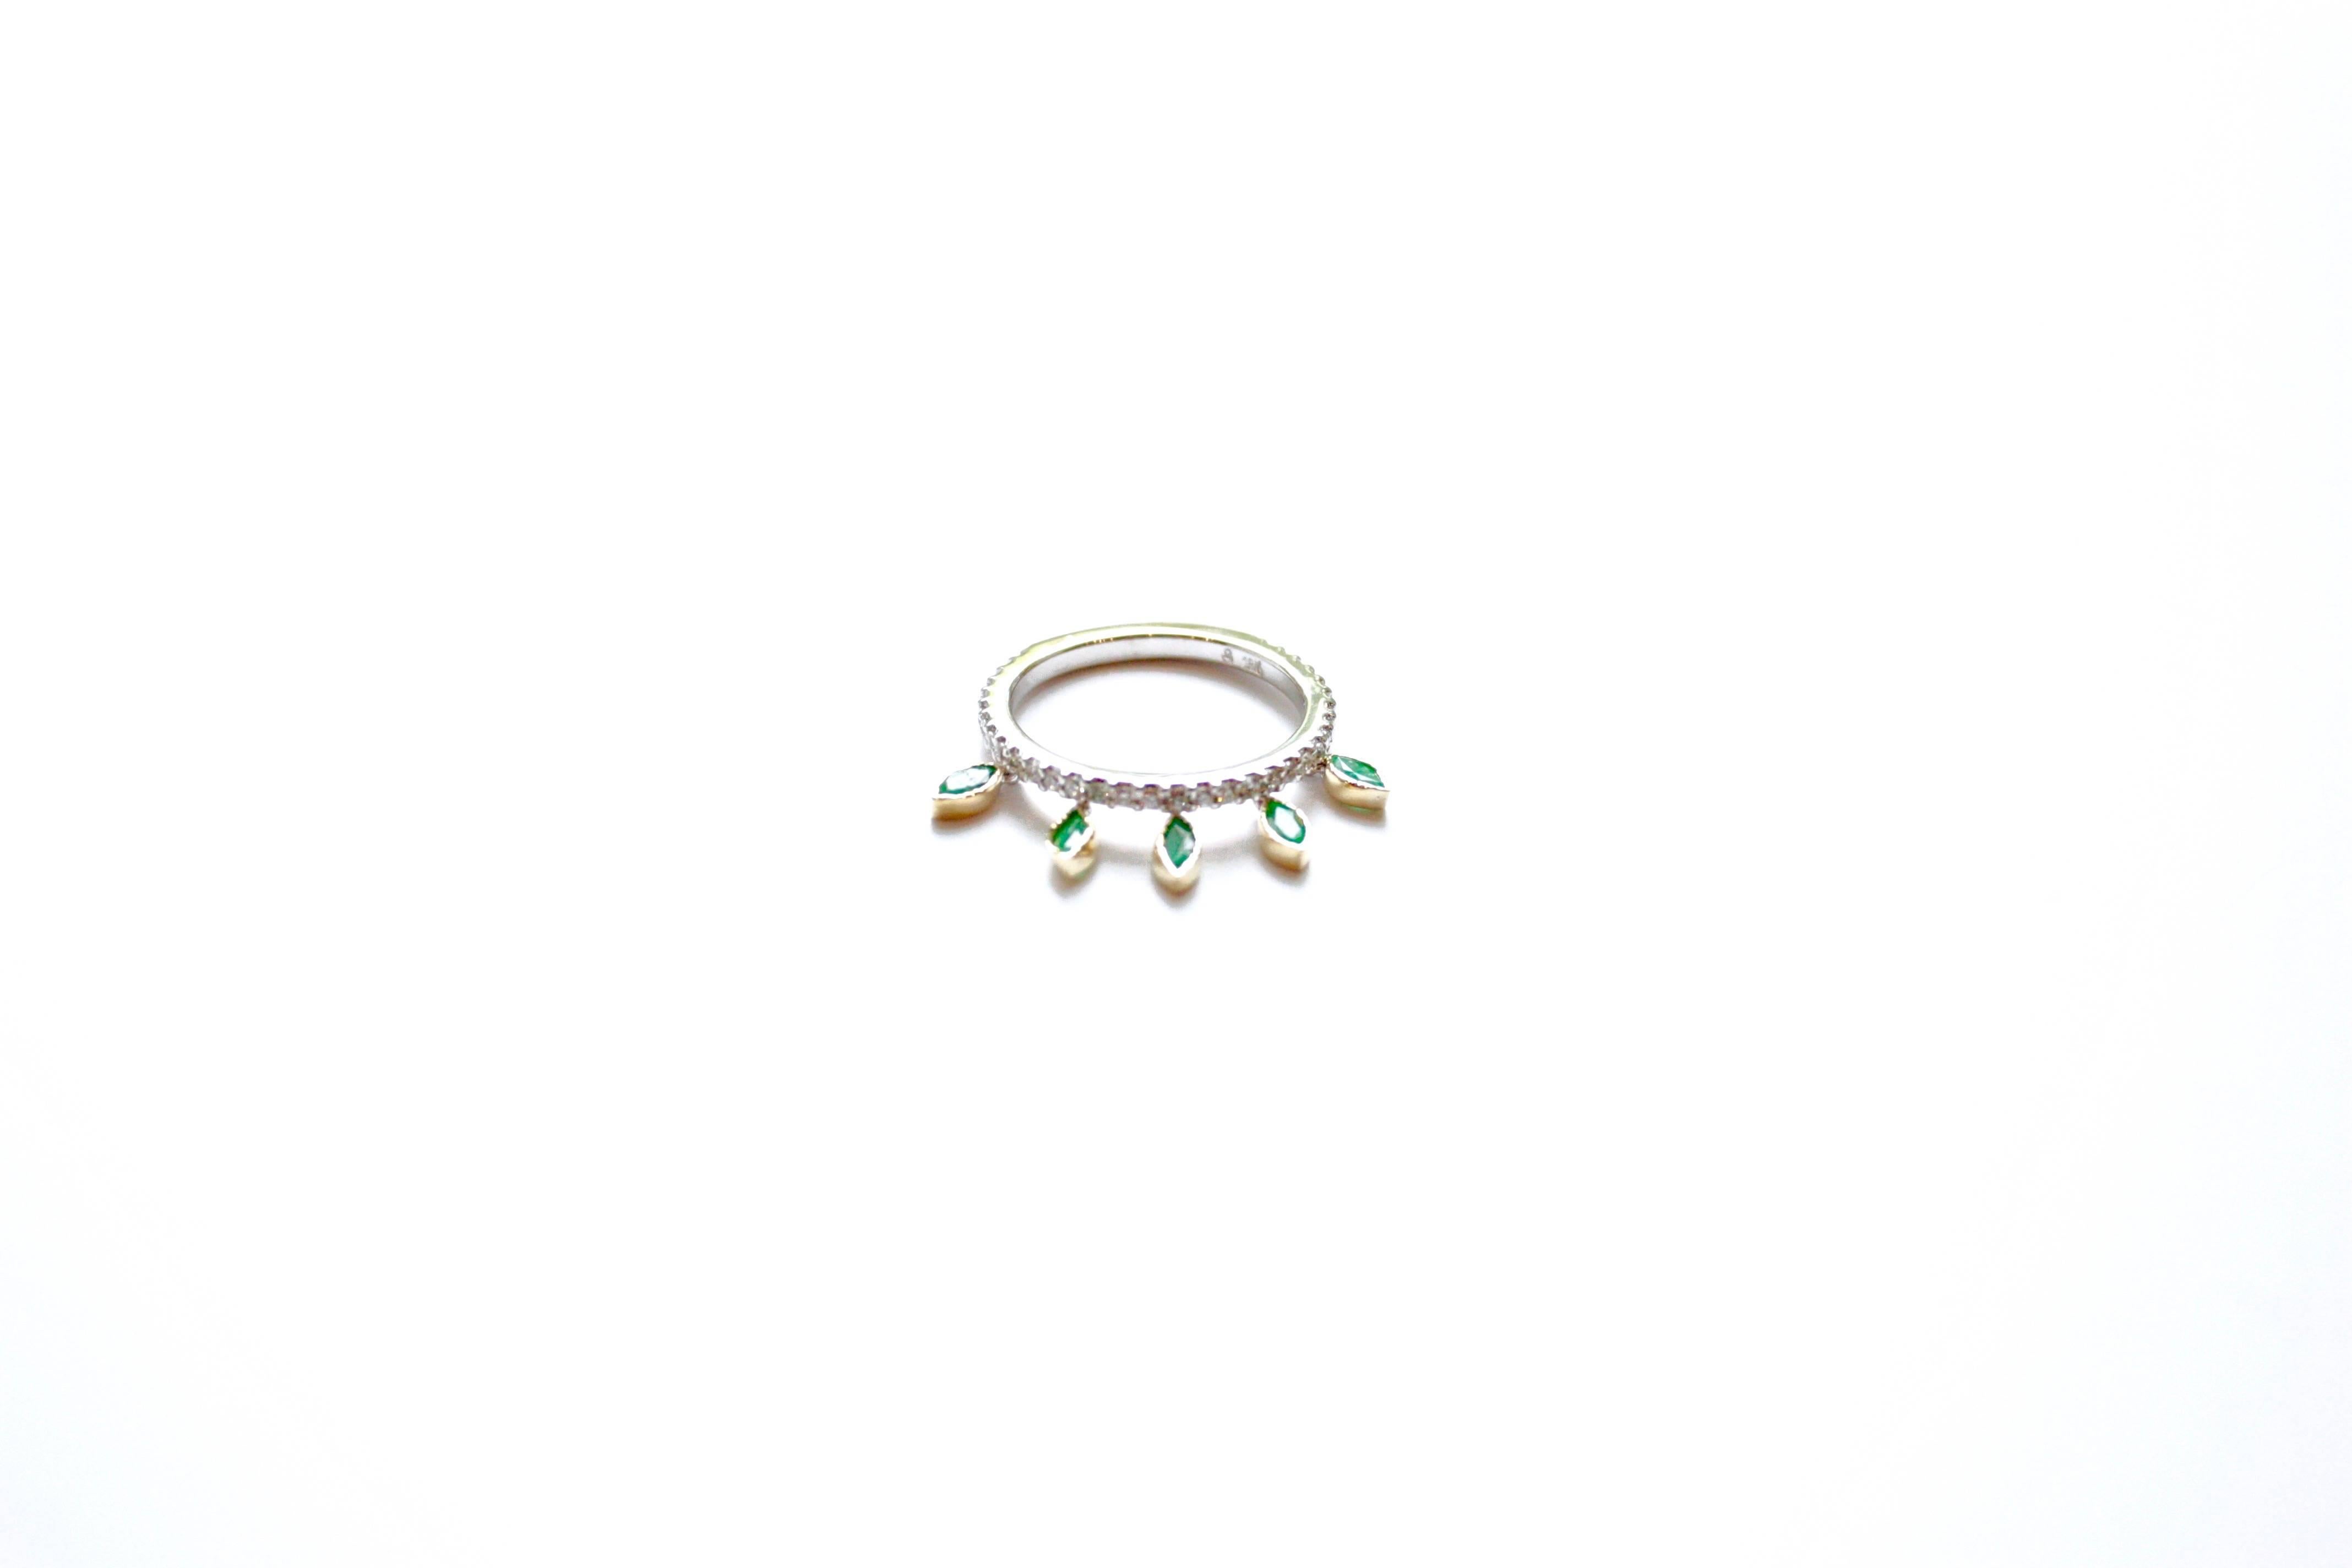 Shimmee® Ring
An eighteen-karat white and yellow gold ring set ¾ of the way with white diamonds.  Suspended unpredictably off one side of the ring are five flexible marquise faceted emeralds.  This modest movement adds discreet glitter to the